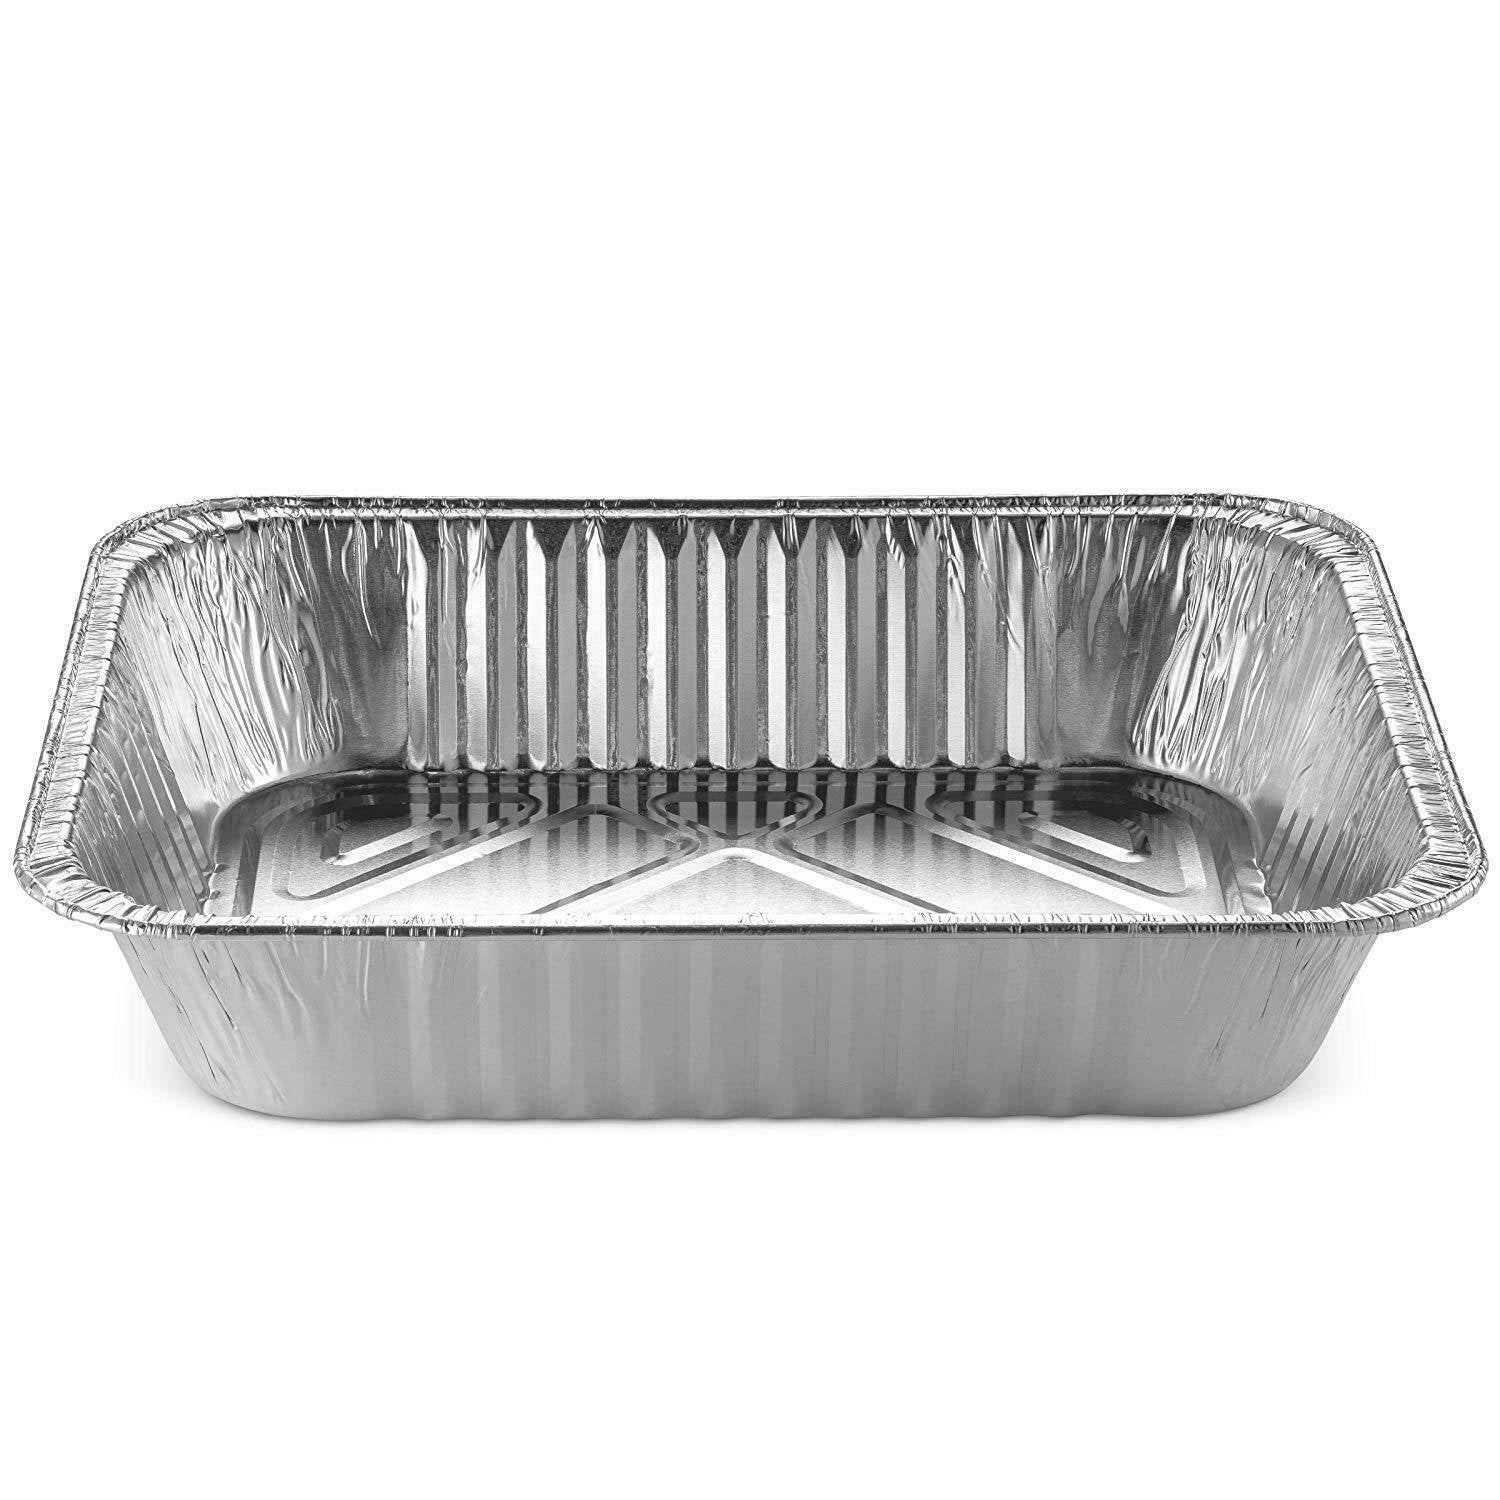 9x13 Disposable Aluminum Foil Pans 30 Pack Large Baking Pan Trays - Heavy  Duty Tin Tray Half Size Chafing Dishes. Food Containers for Roasting,  Cooking, Heating or Steam Table